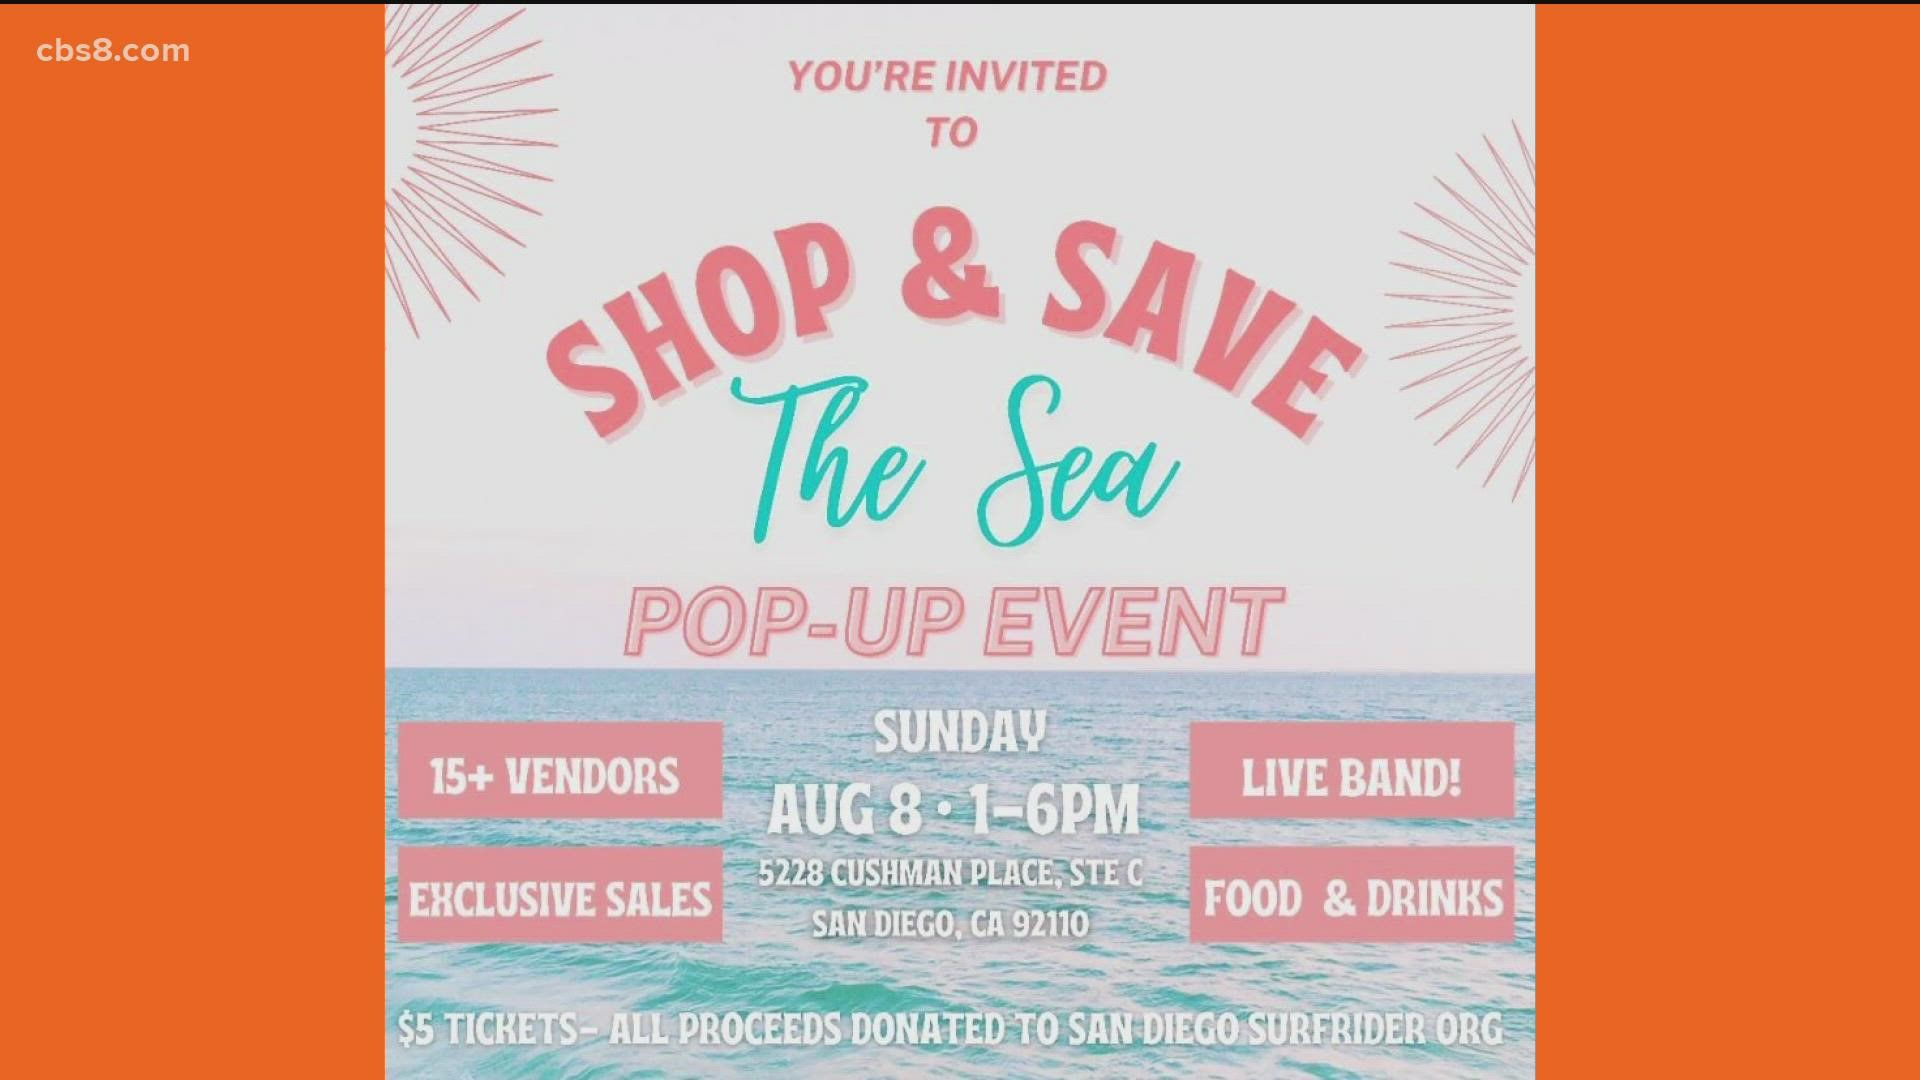 Their love for the beach inspired their business and now Madison & Mariah are putting on a pop-up event so you can shop and save the sea.